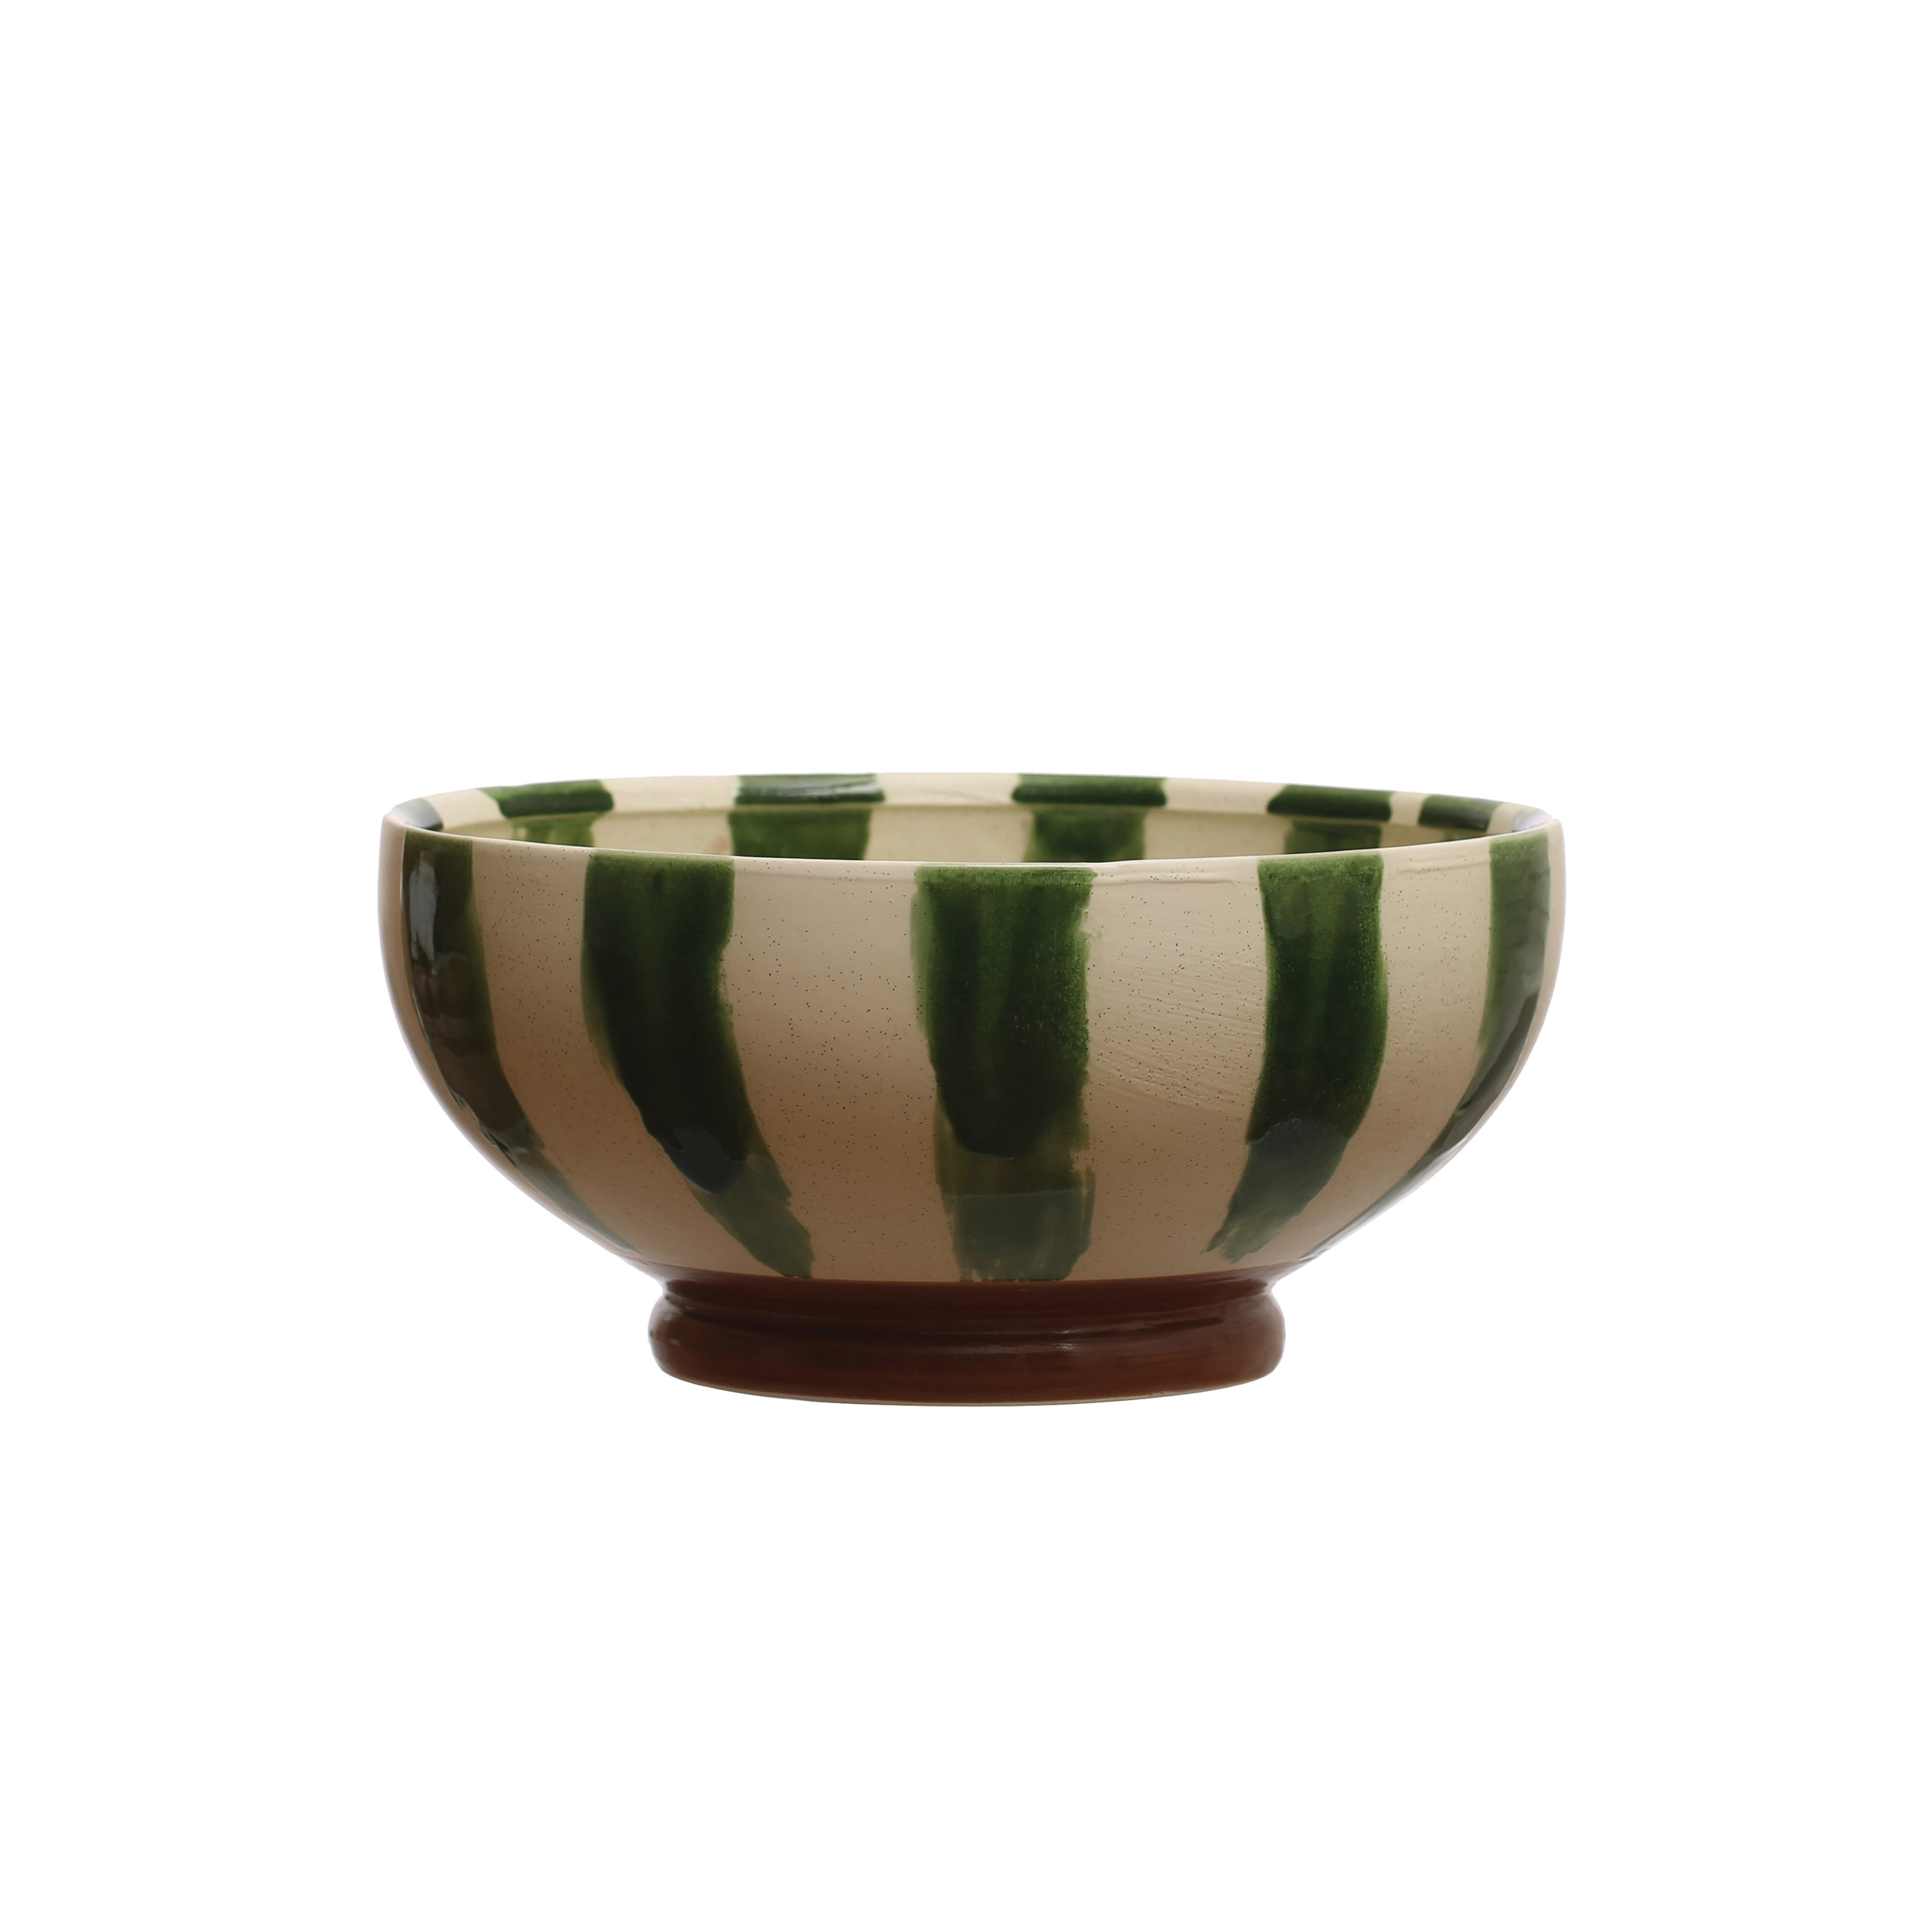 10.25 Inches Round Hand-Painted Stoneware Footed Bowl with Stripes and Reactive Glaze, Green, White and Brown - Image 0